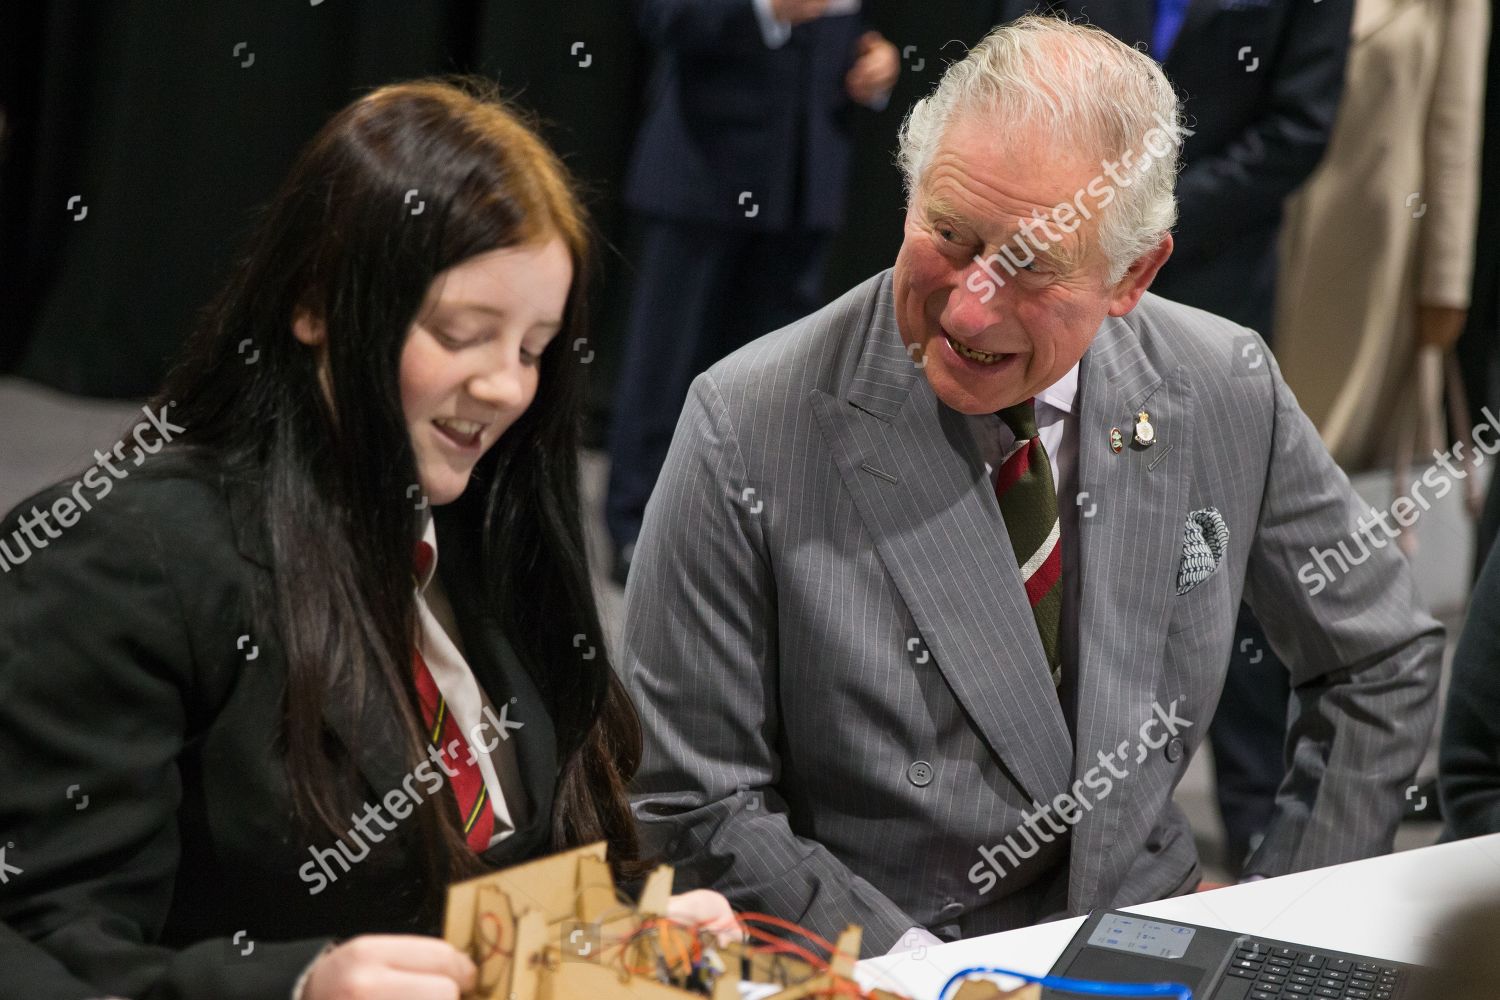 prince-charles-visit-to-wales-uk-shutterstock-editorial-10115952f.jpg